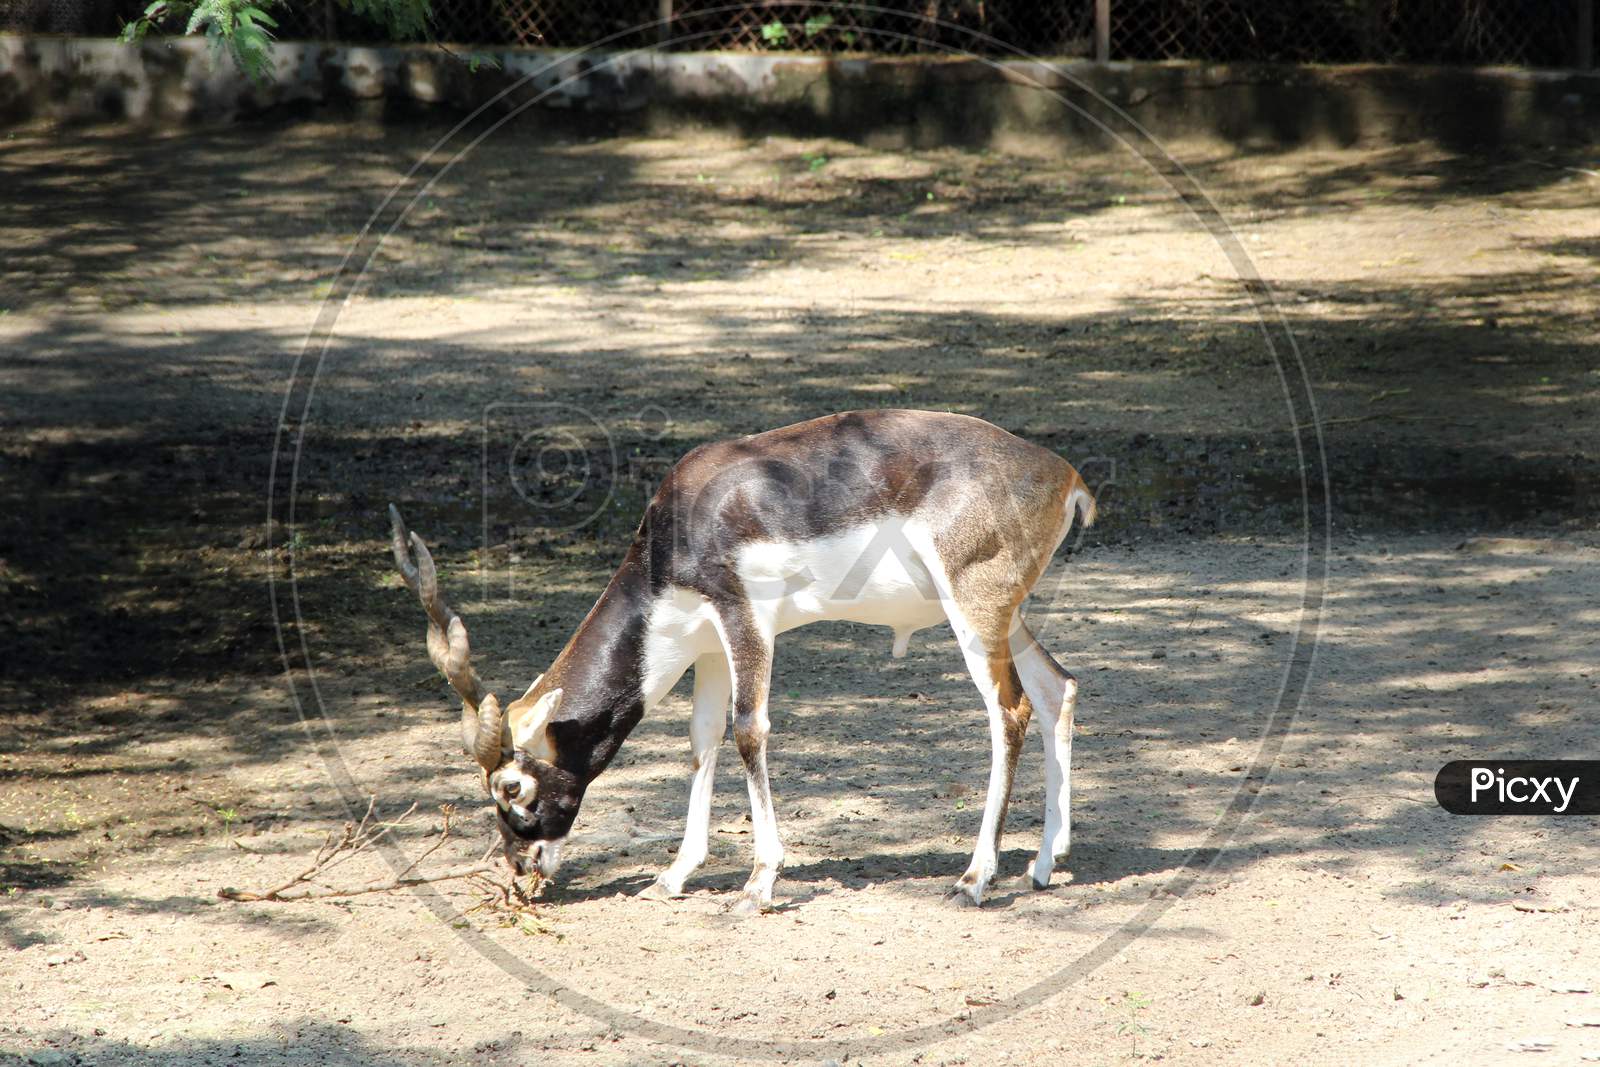 An Indian Blackbuck (Antilope cervicapra, also known as the Indian antelope)